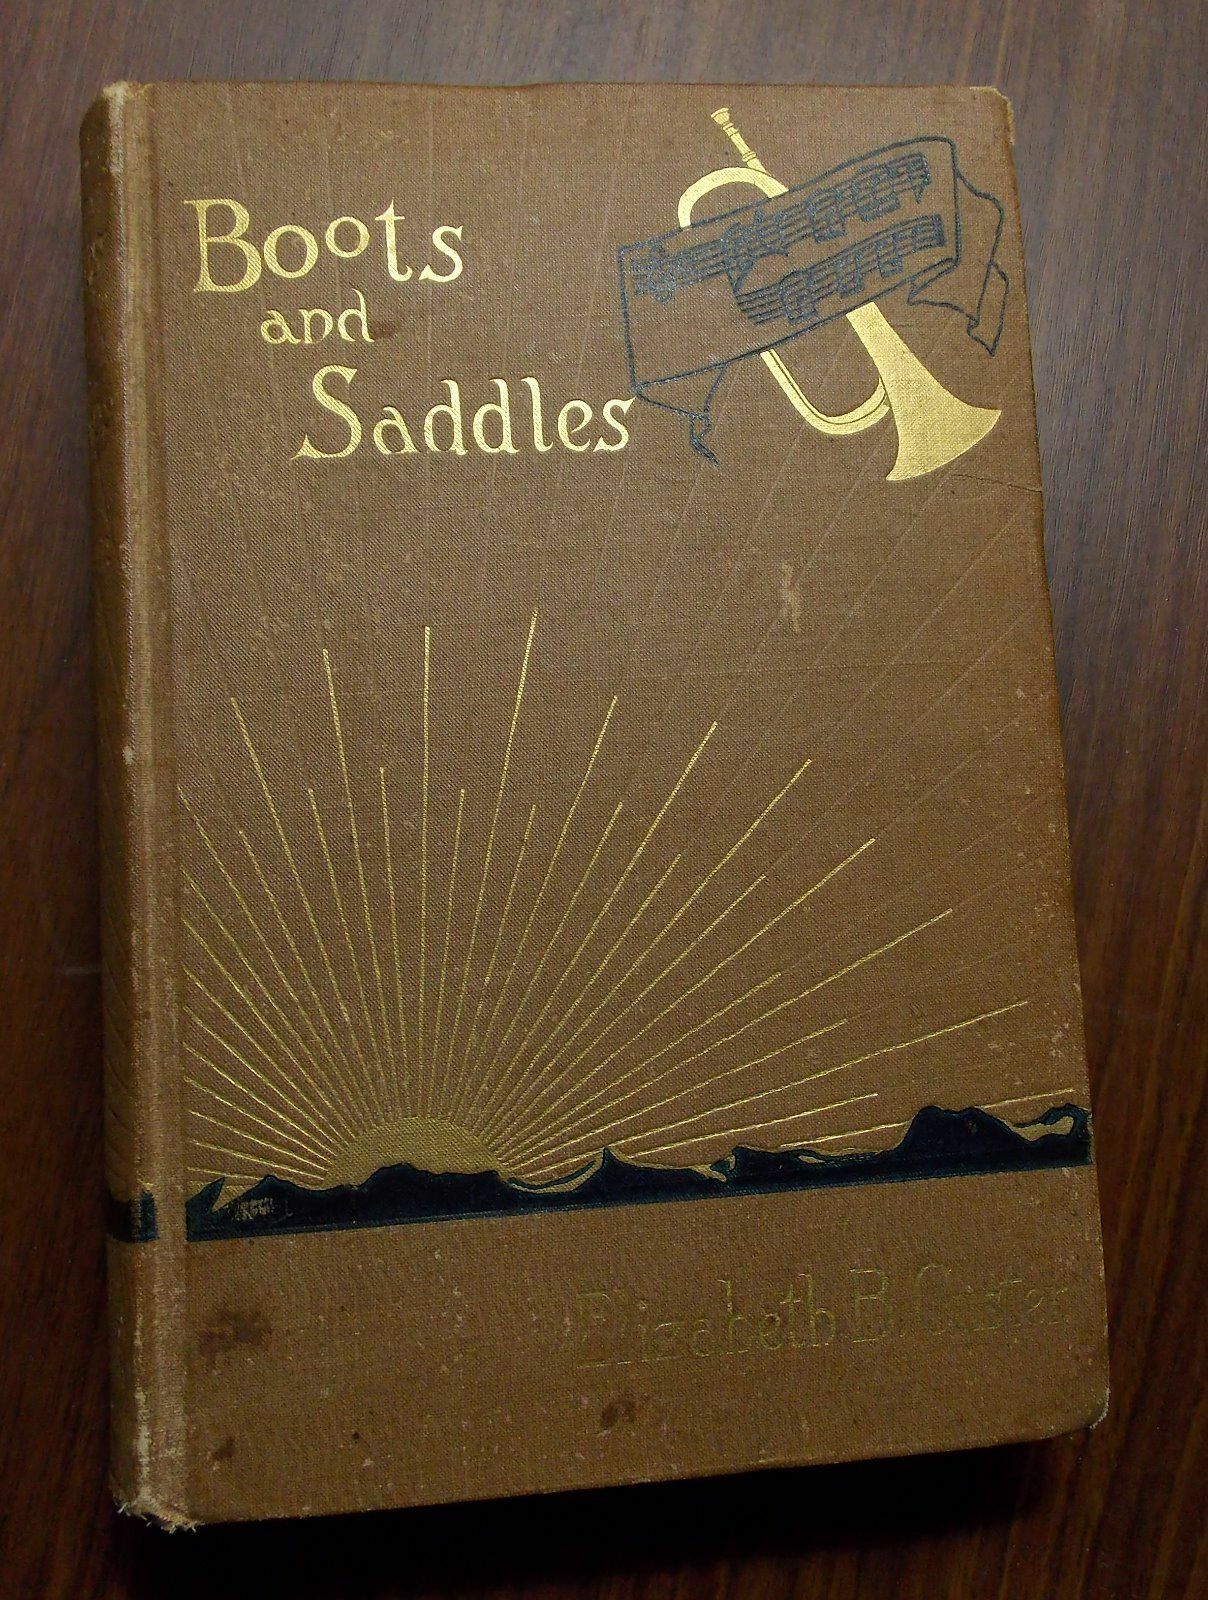 1885 Boots & Saddles, 1st Ed by Liz Custer. Desirable map/photo 1885 Inscription